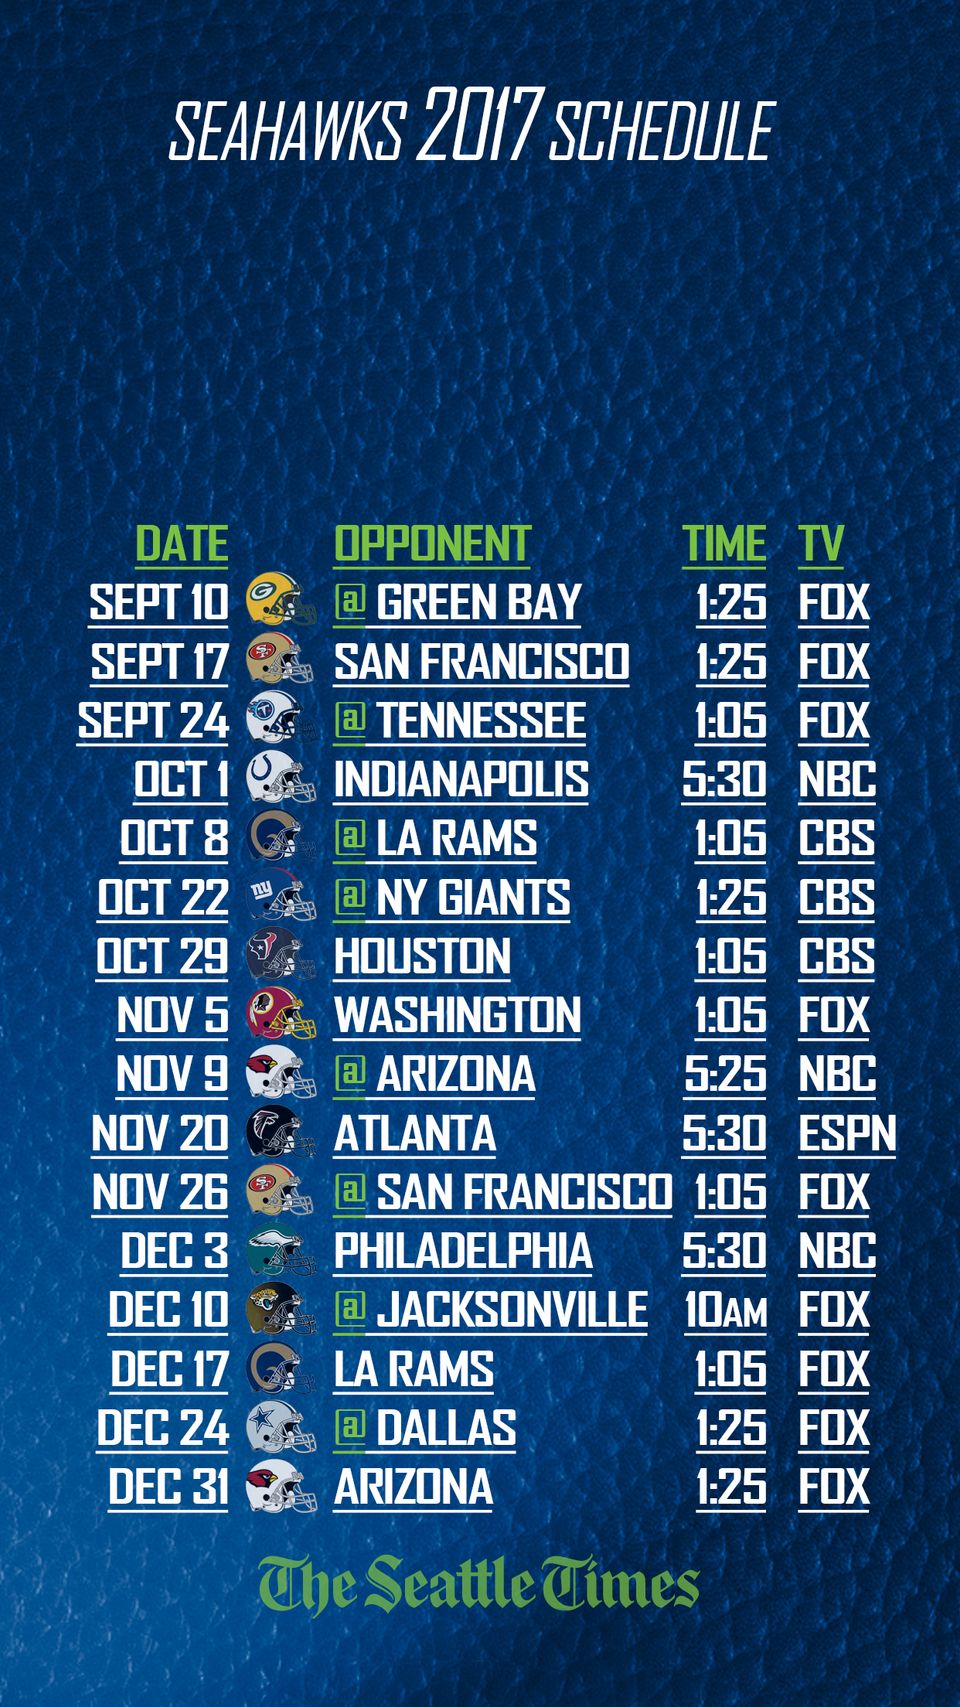 Print and save your own 2017 Seahawks schedule | The Seattle Times